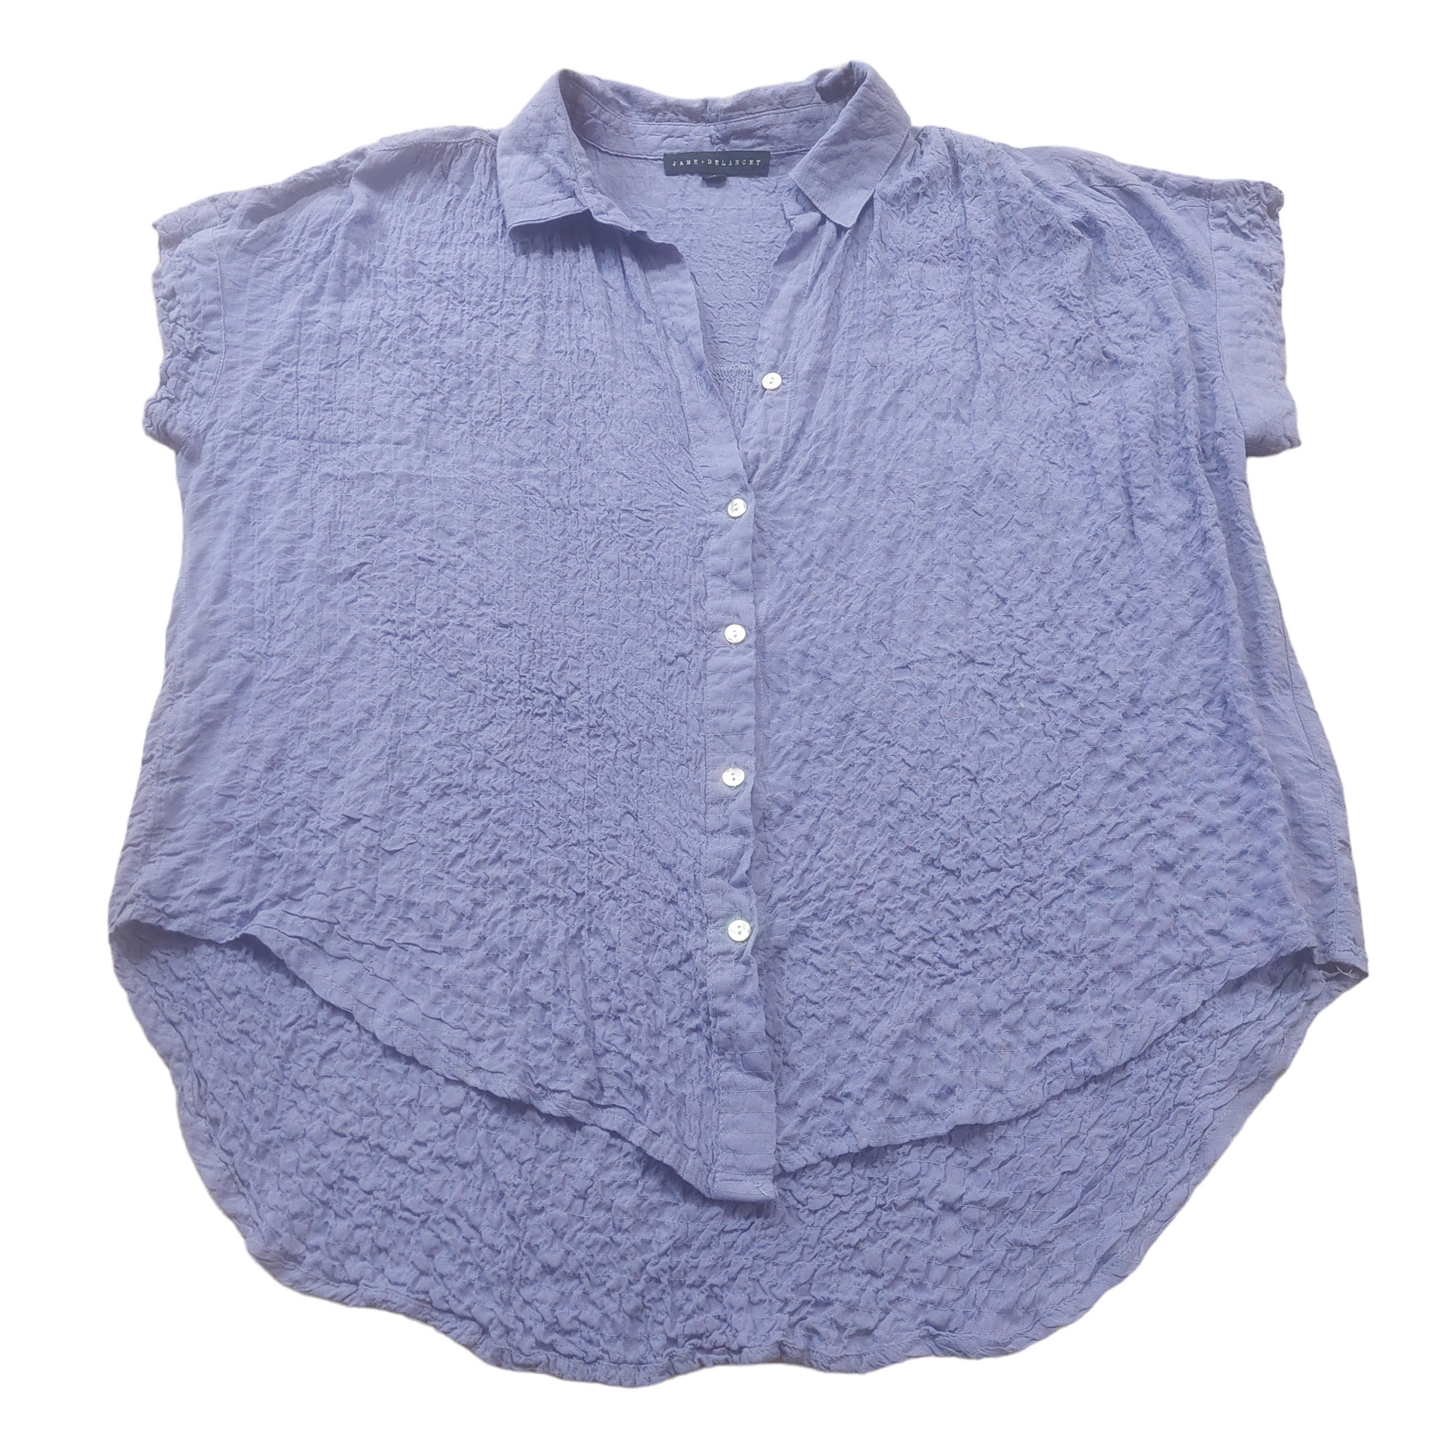 Purple Top Short Sleeve Jane And Delancey, Size S